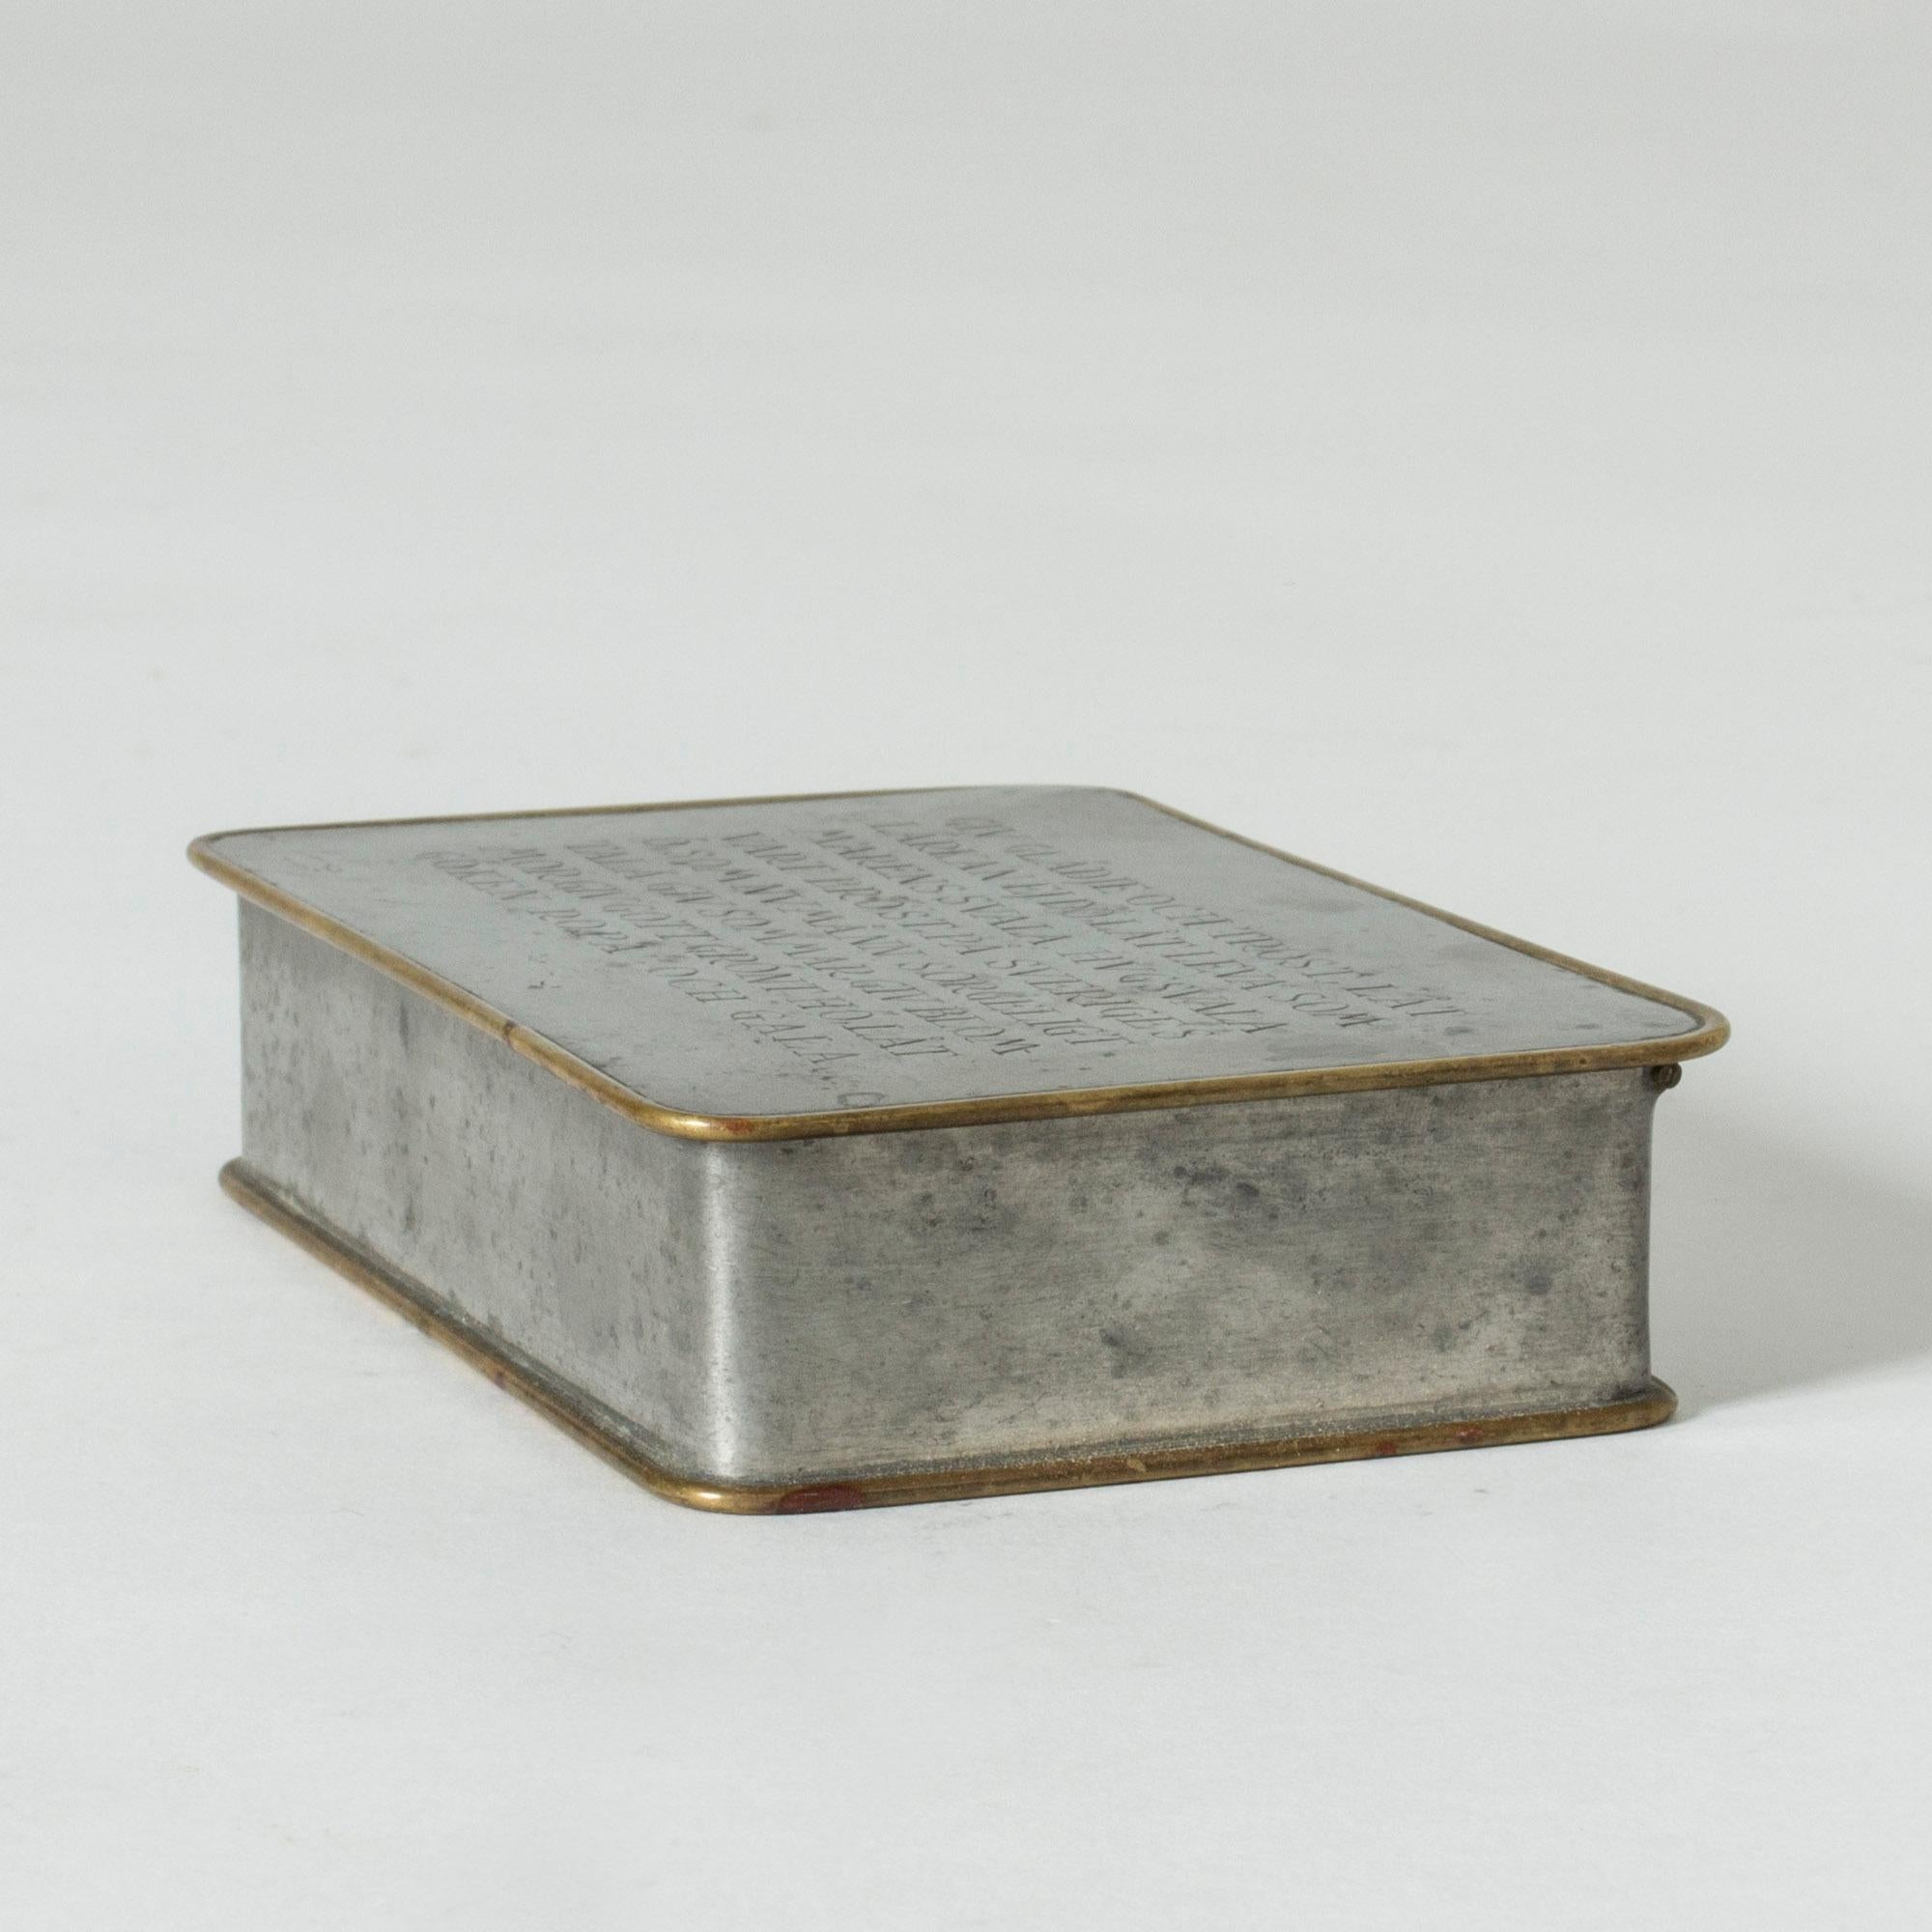 Pewter box with a brass rim by Nils Fougstedt. The lid is inscribed with the last verse of a poem by the Swedish 17th century poet Lars Wiwallius, called “Klago-Wijsa” (“Ballad of Lament”). The poem was written during a long period of imprisonment.